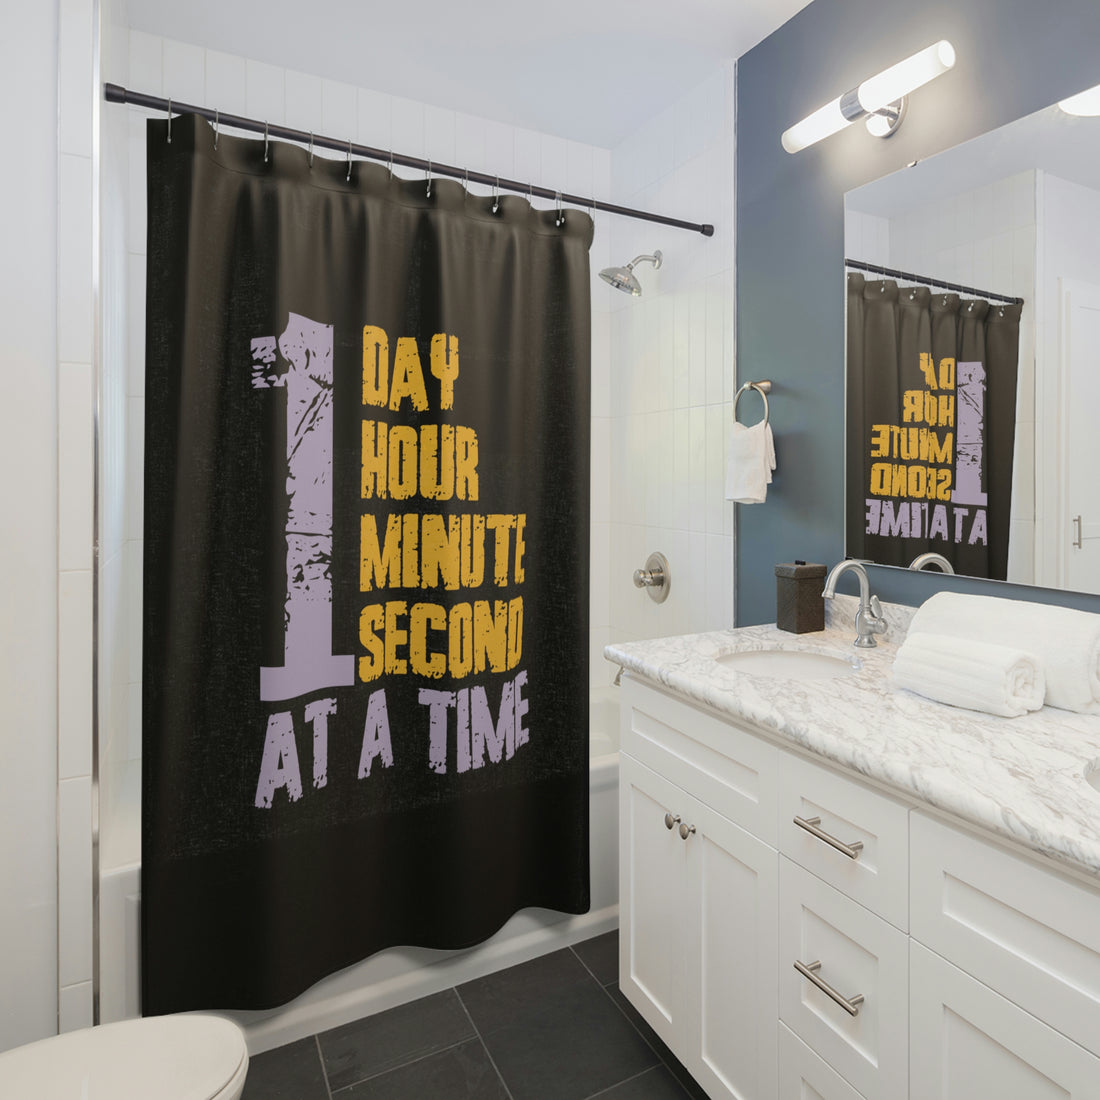 1 Day Hour Minute Second At A Time - Shower Curtain